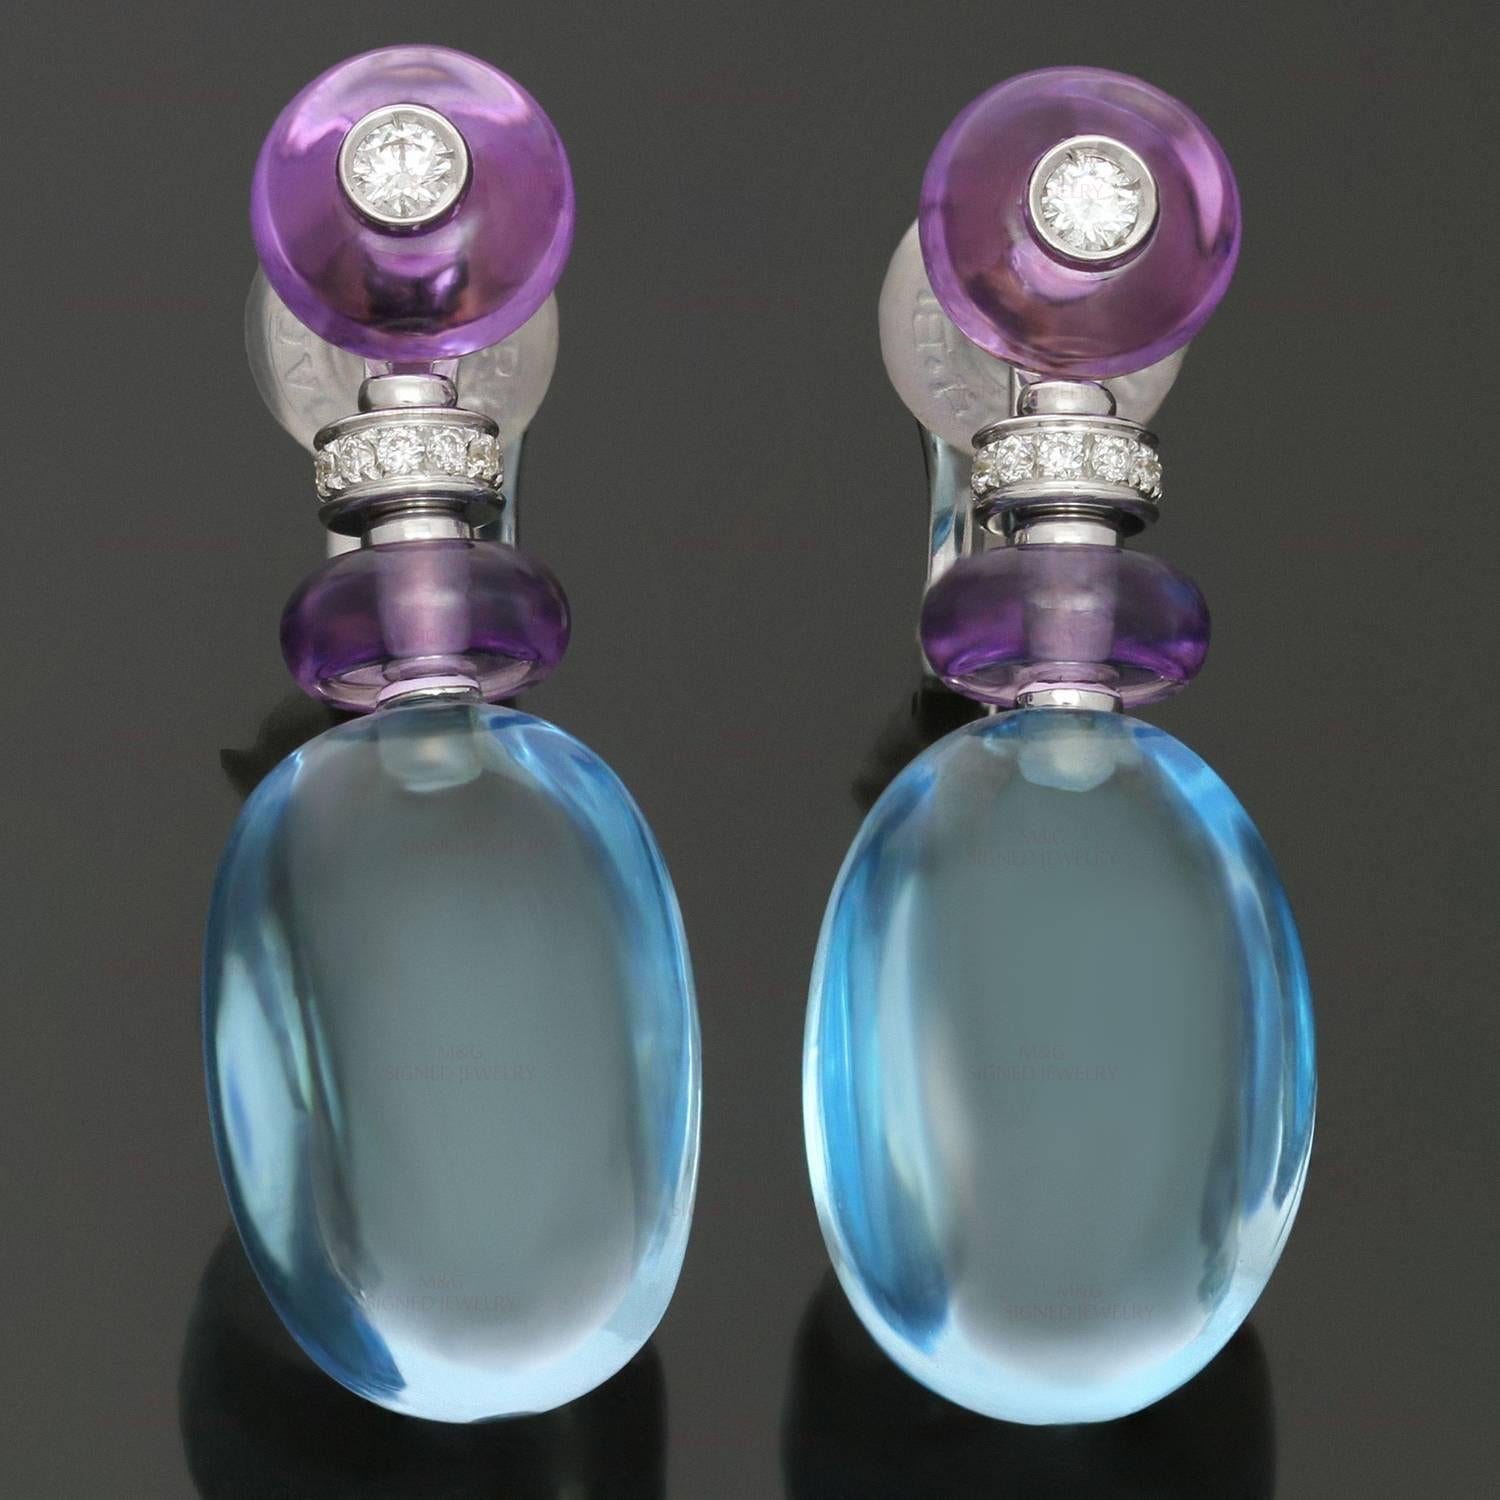 These gorgeous clip-on earrings from Bulgari's Sassi collection are crafted in 18k white gold, set with brilliant-cut round diamonds and completed cabochon amethyst rondels and cabochon blue topaz droplets. Made in Italy circa 2010s. Measurements: